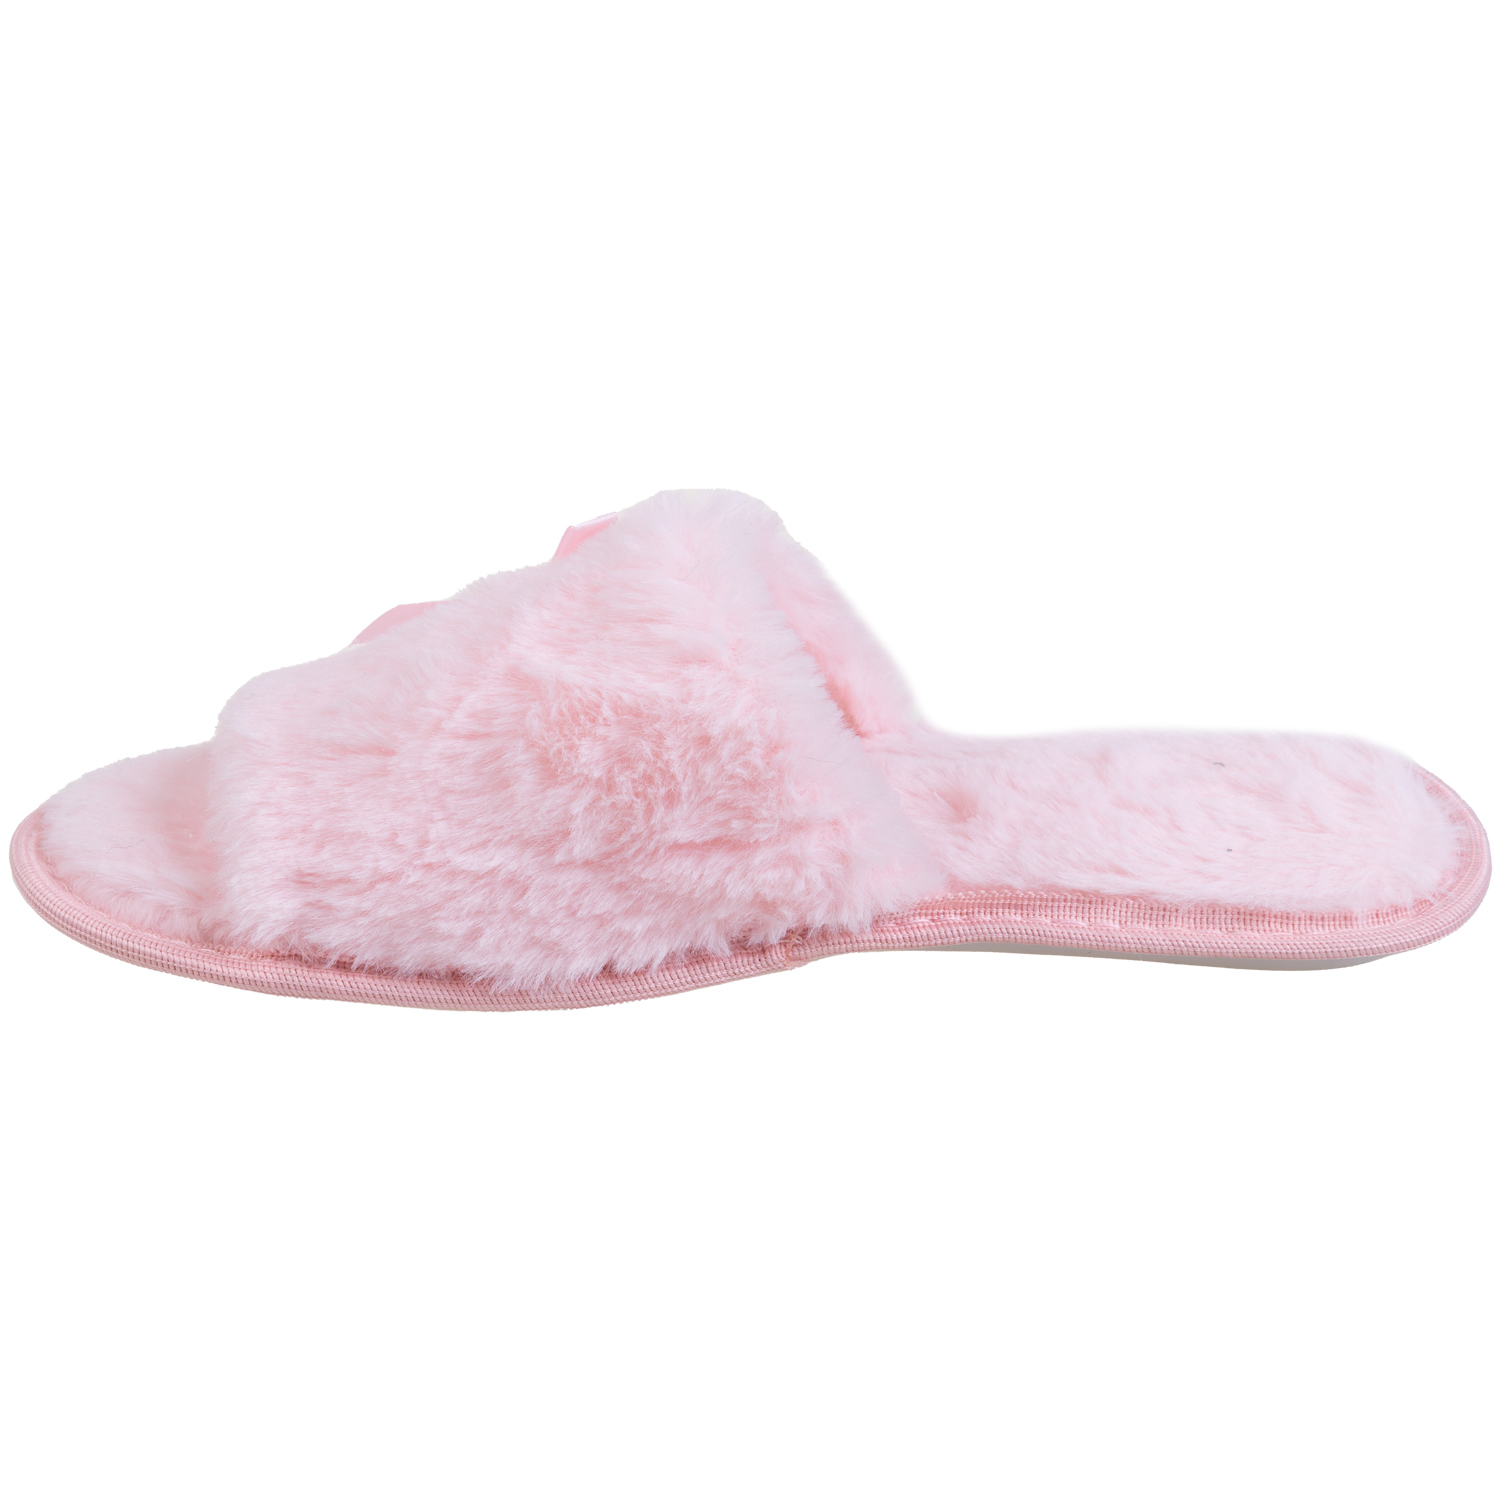 Faux fur open toe slippers with satin bow & jewel - Pink. Colour: pink